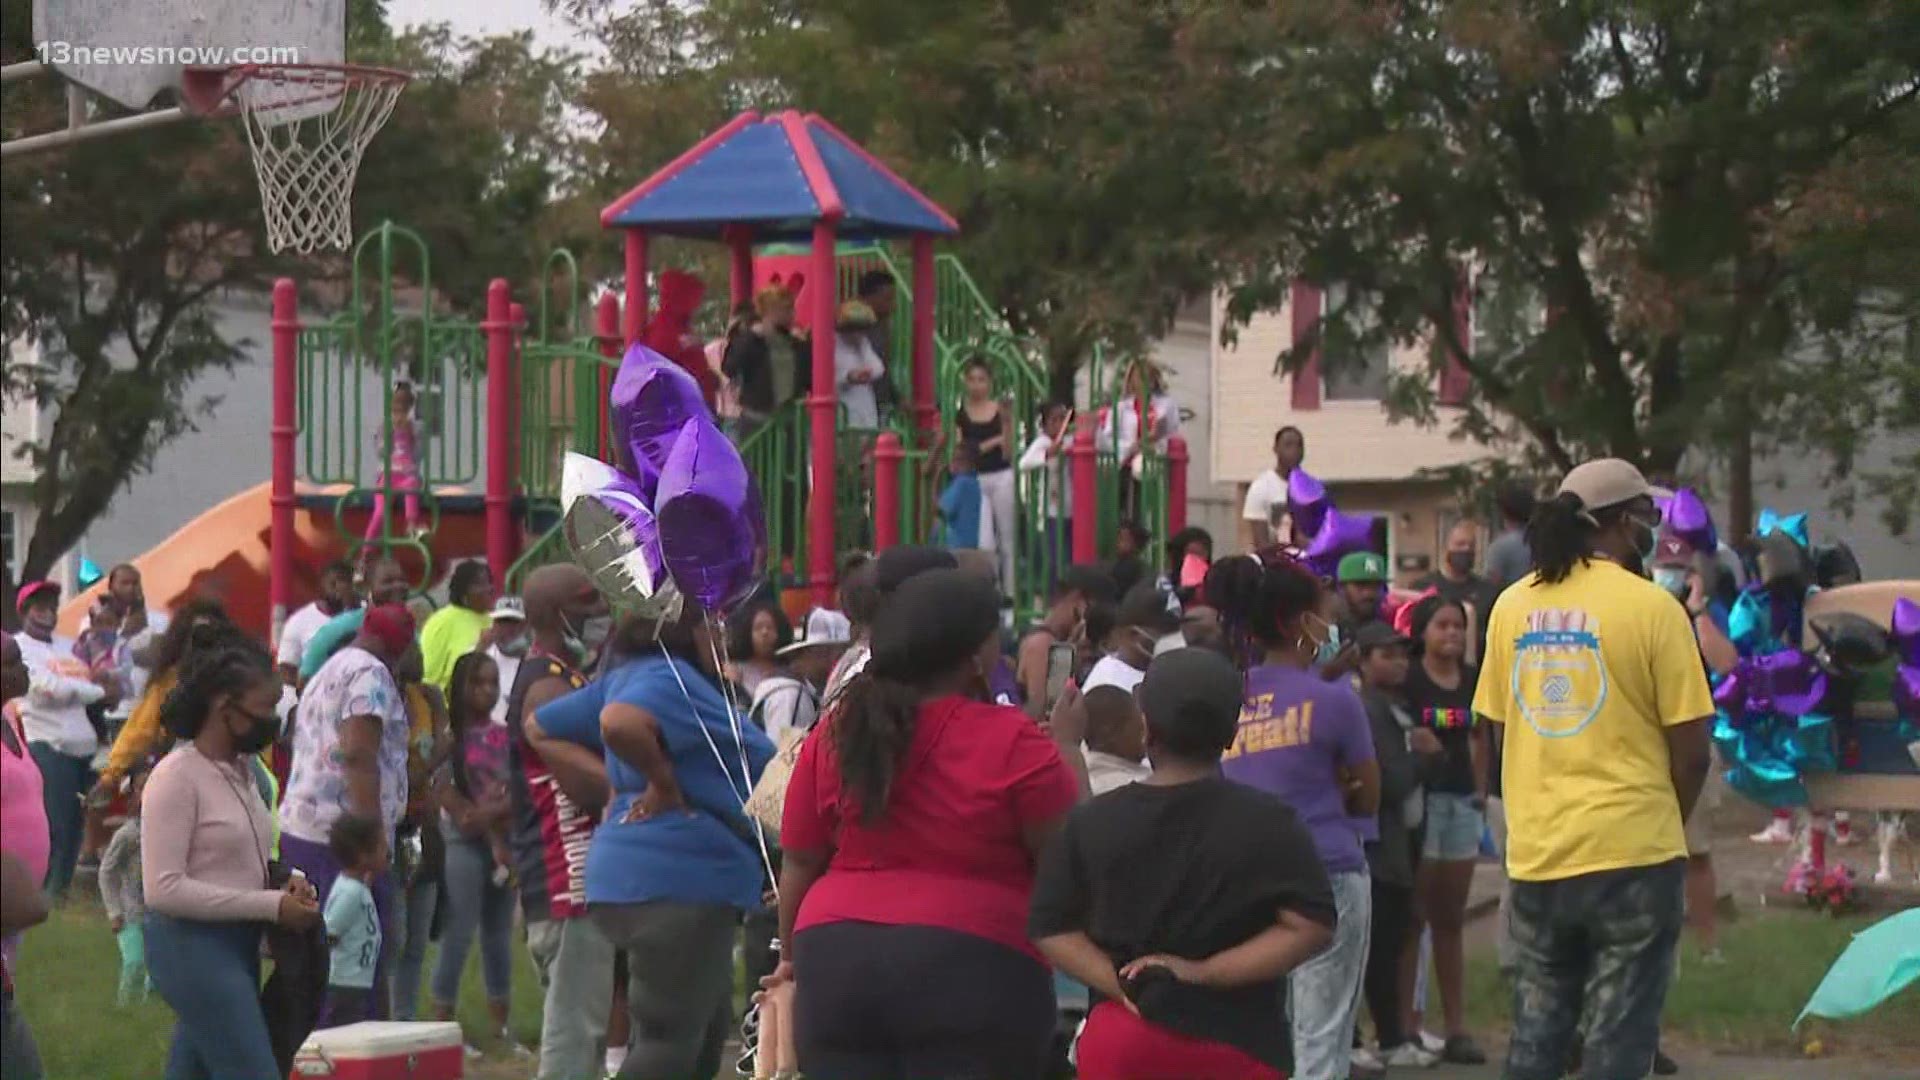 A "Stop the Violence" rally is underway in Norfolk. It comes after a lot of shootings involving children in our area, including the death of a 17-year-old girl.